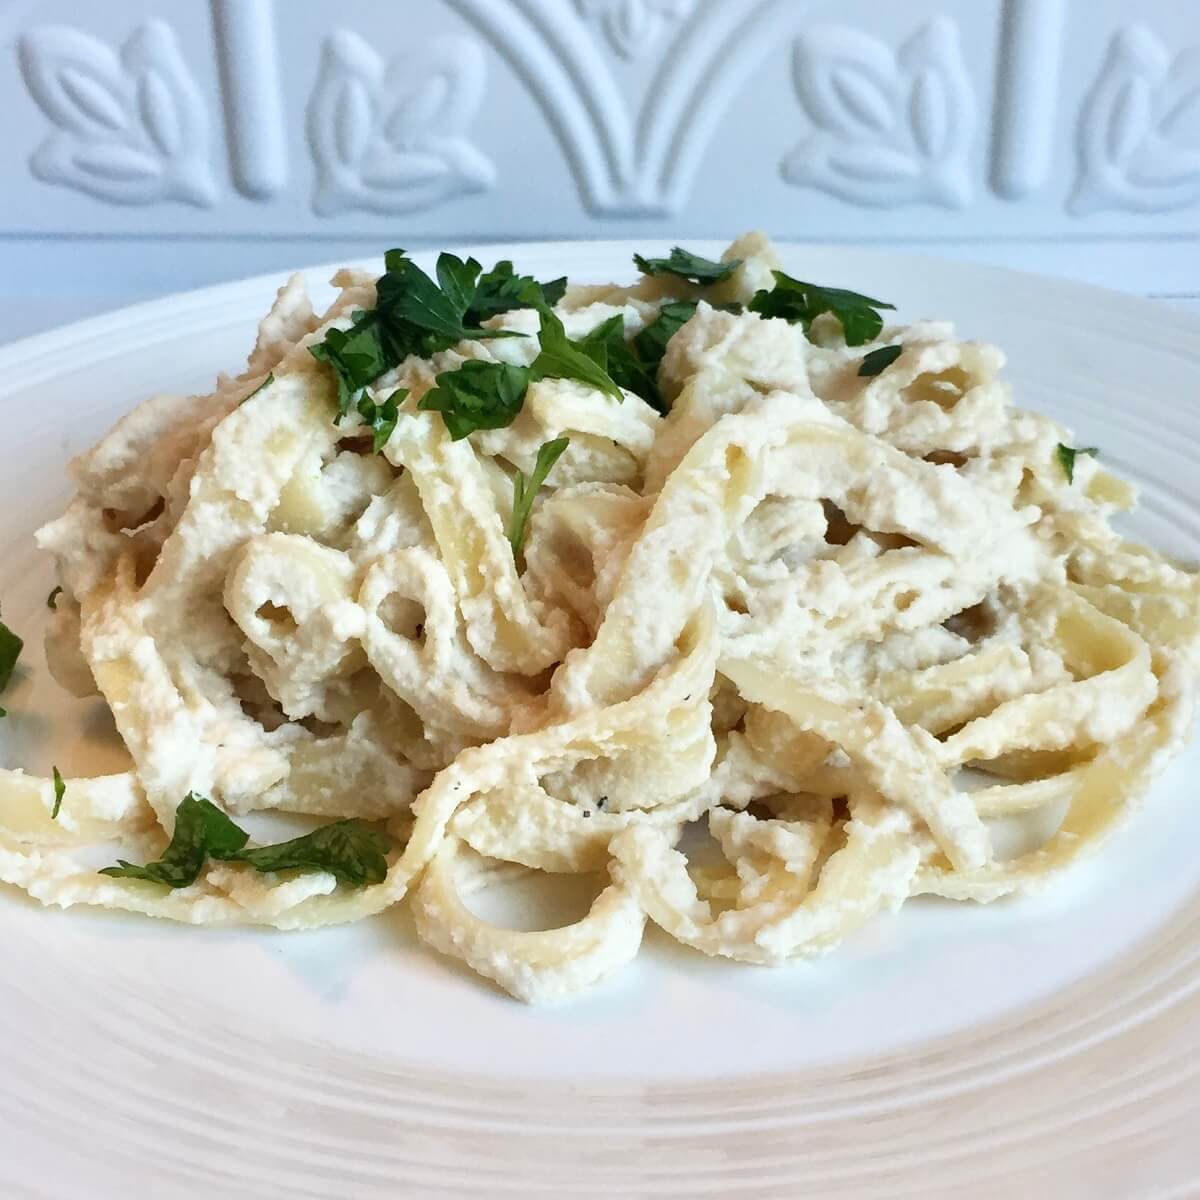 Noodles smothered in a creamy cashew pasta sauce on a white plate.